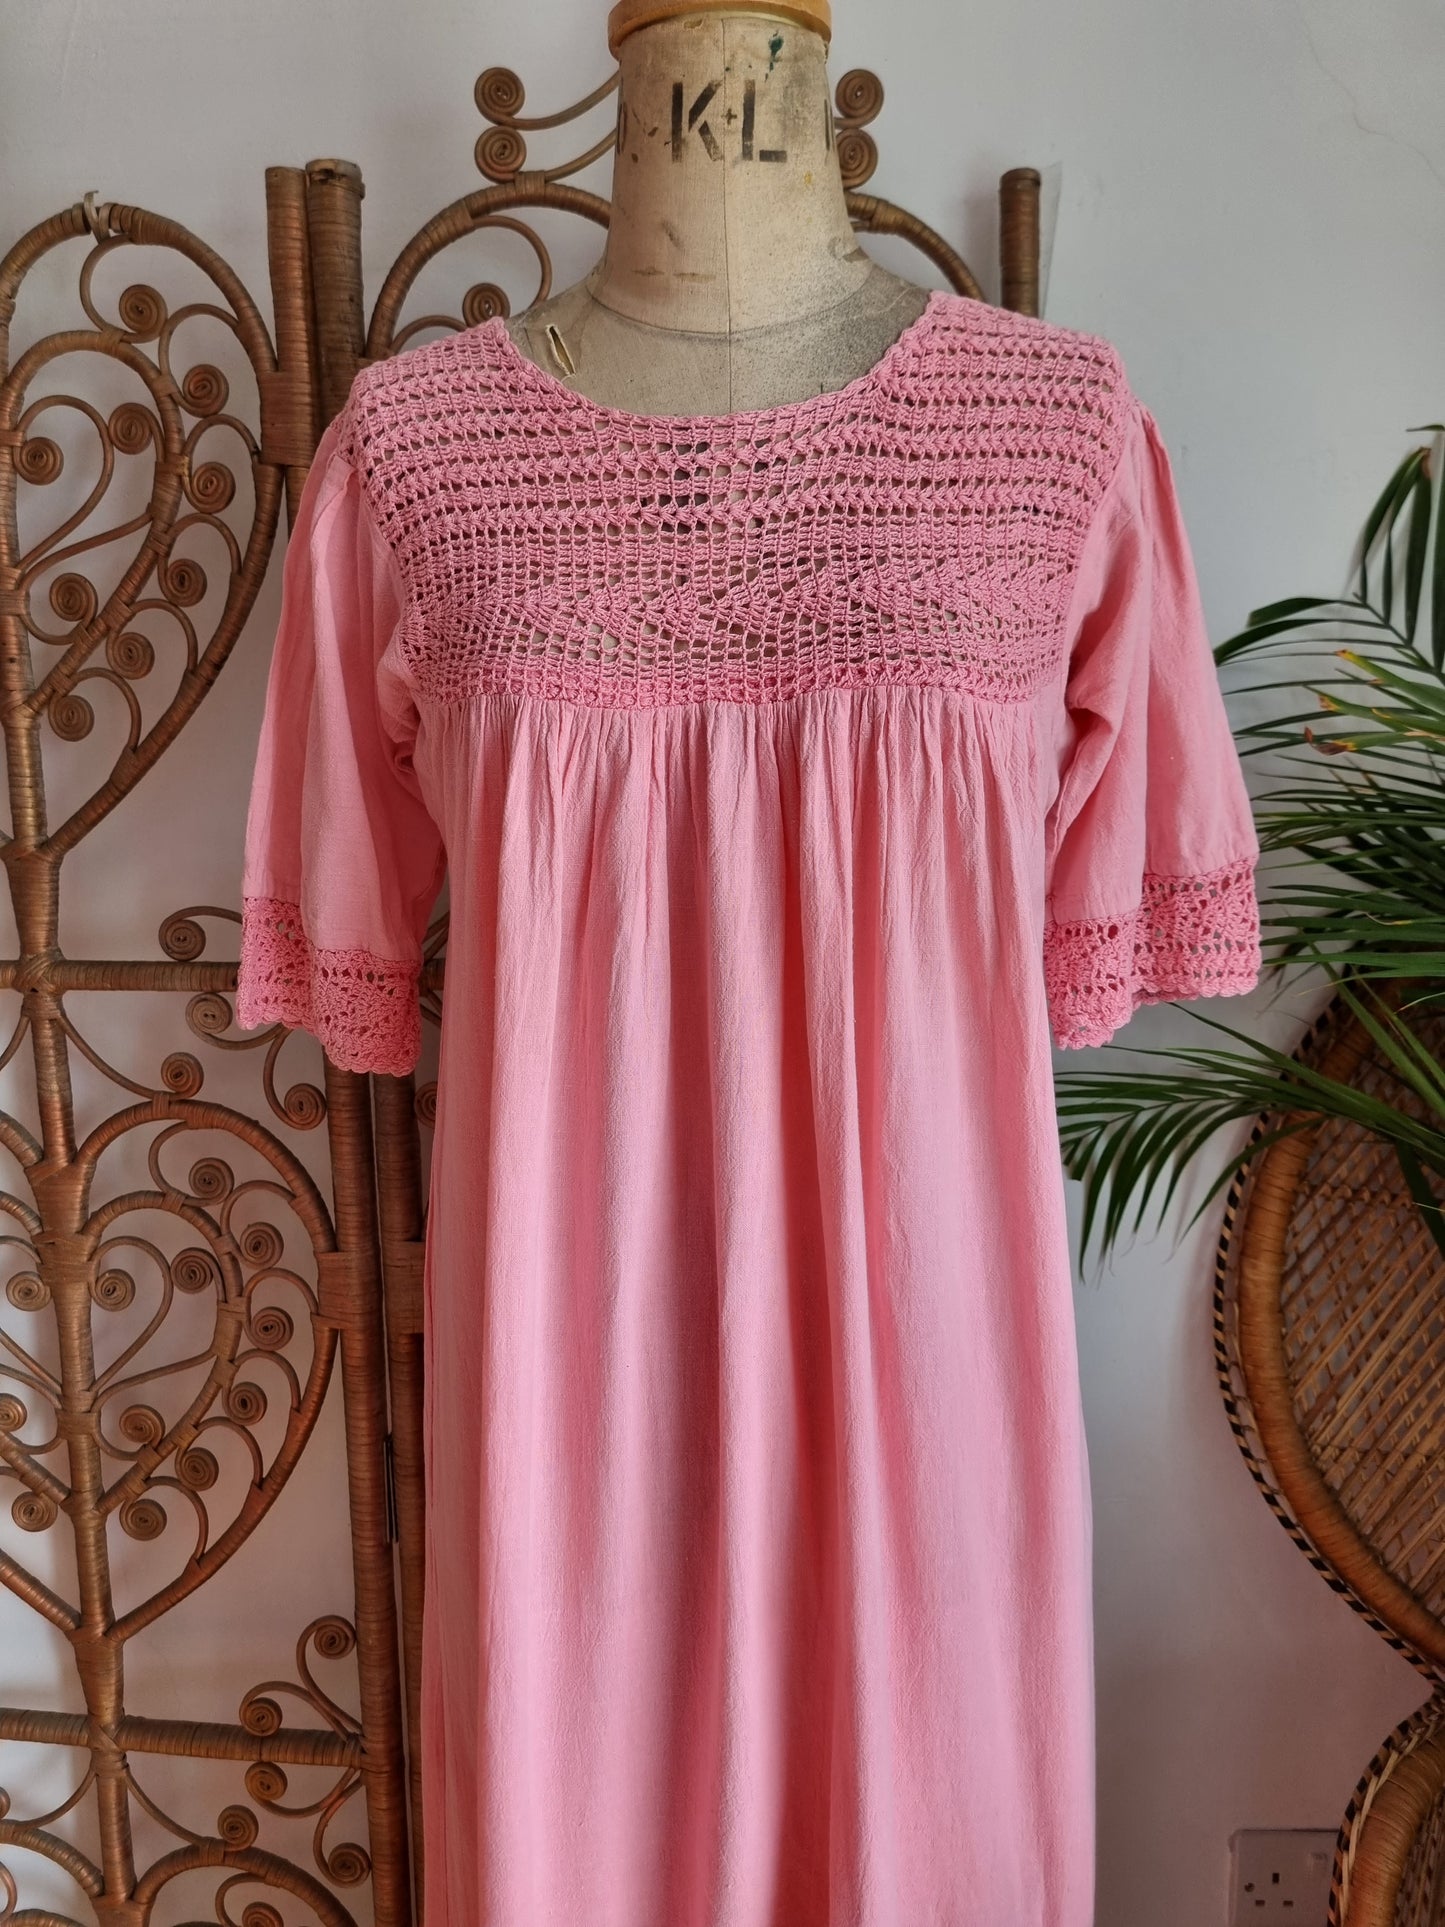 Vintage crochet cheesecloth dress